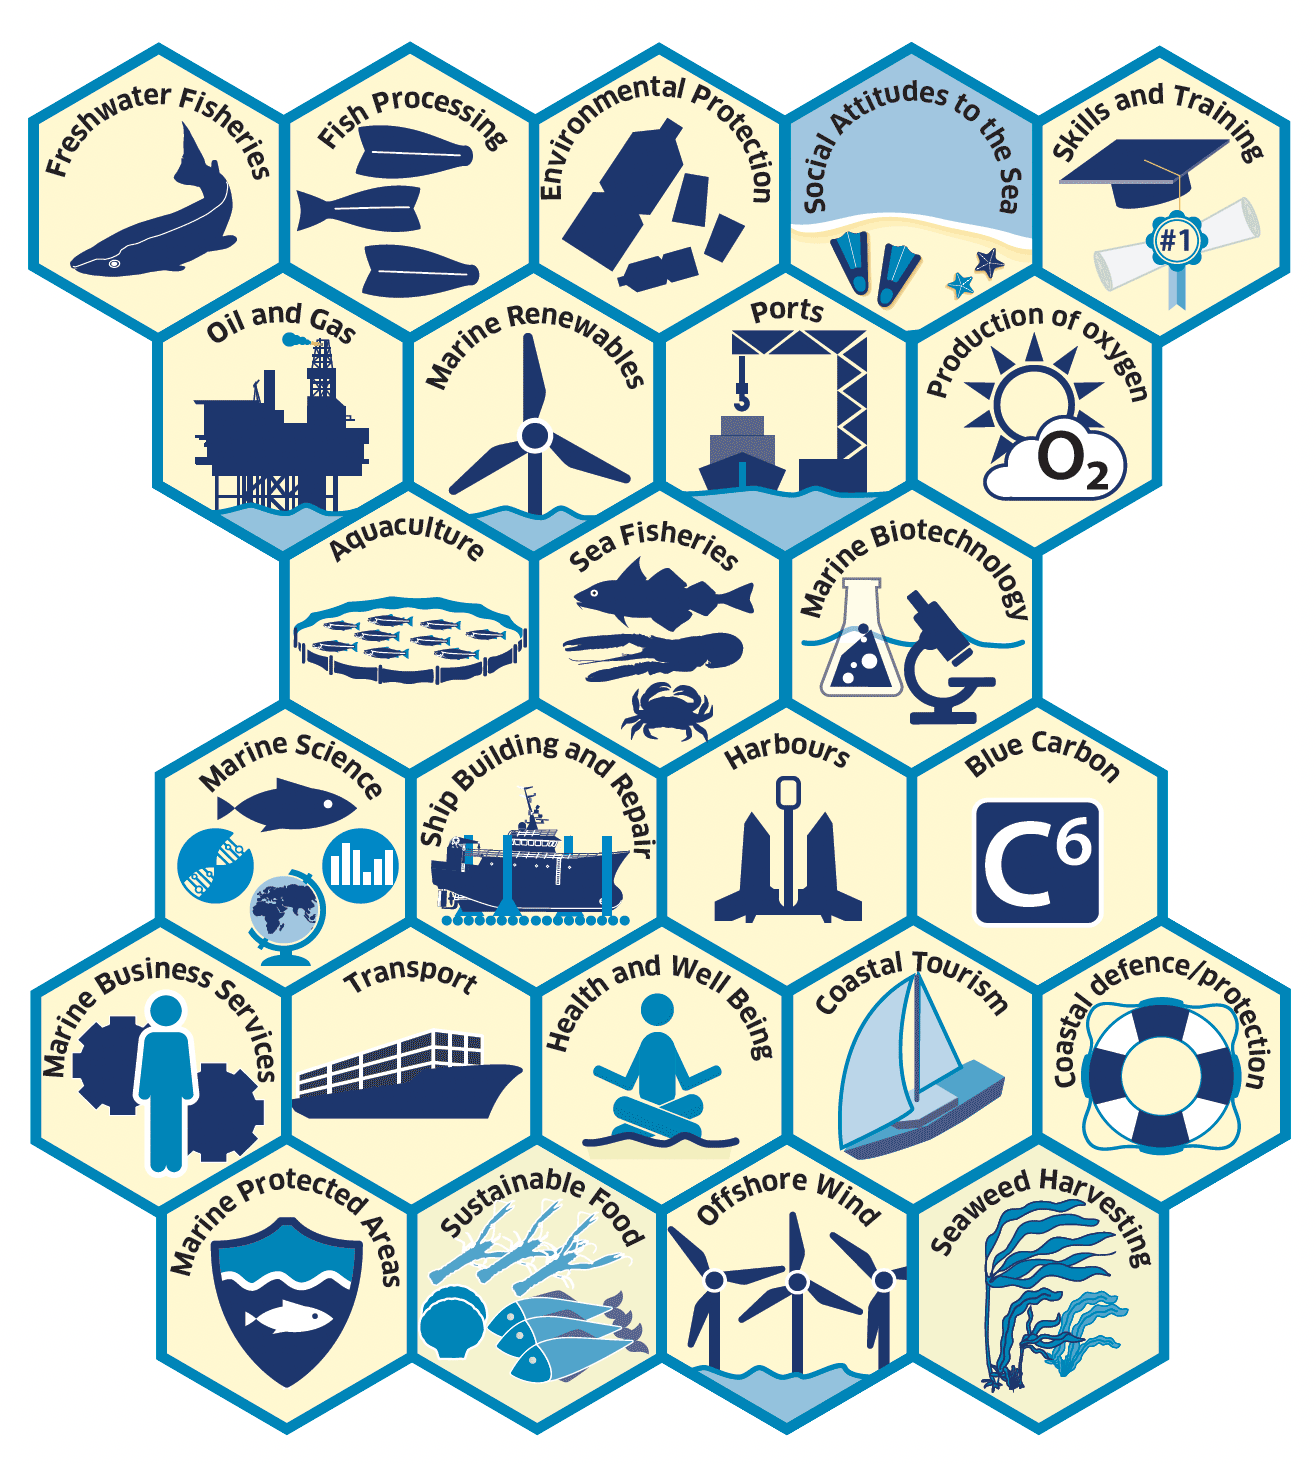 25 icons describing the many aspects of Scotland's blue economy in a connected grid